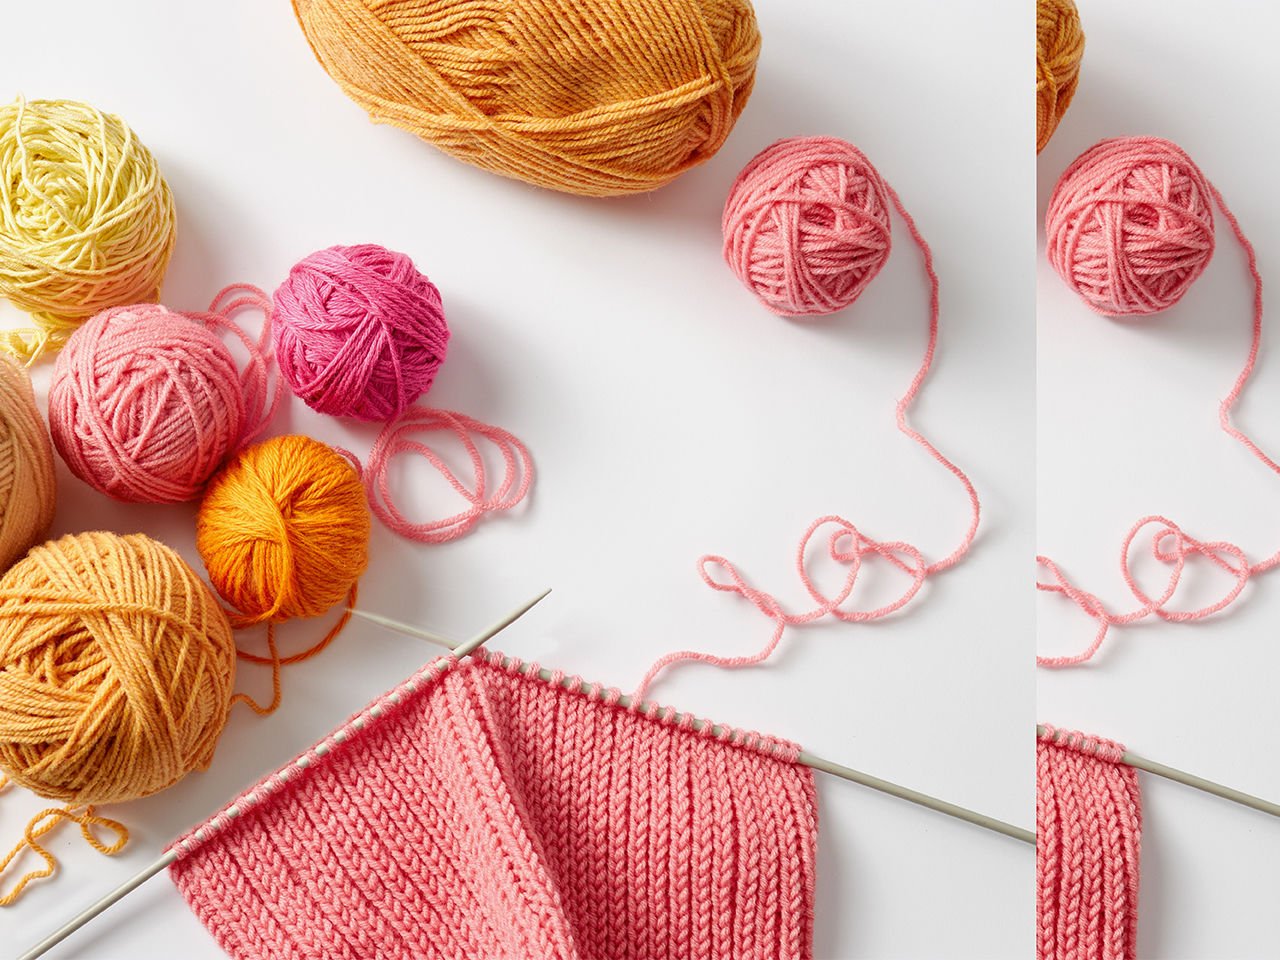 Artisan Yarn & Pattern Subscription for Knitters